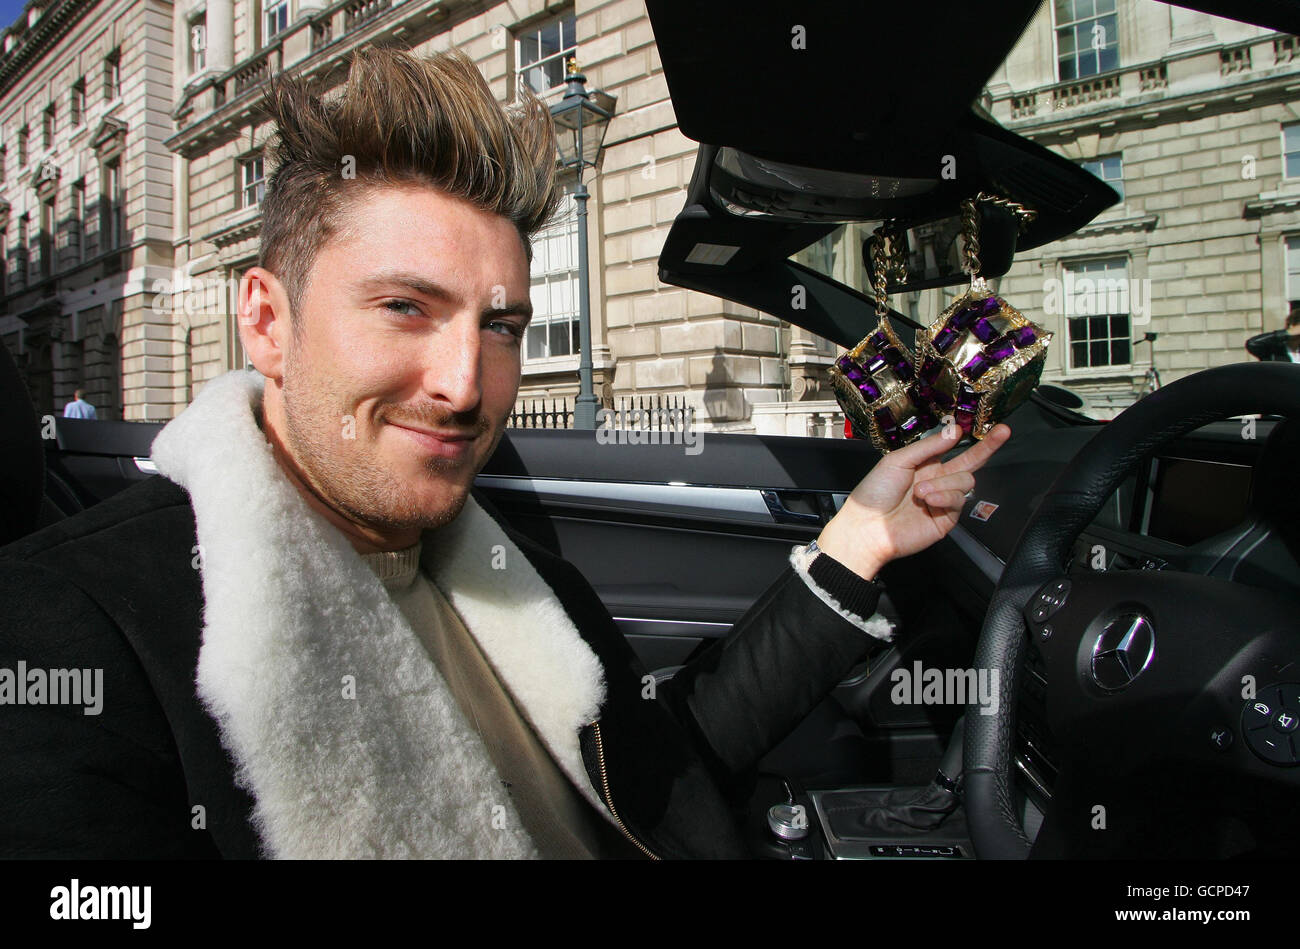 Fashion designer Henry Holland launches the 'Mercedes-Benz Car Boot-ique' with his limited edition 'furry dice' at Somerset House in central London, during London Fashion Week. Stock Photo